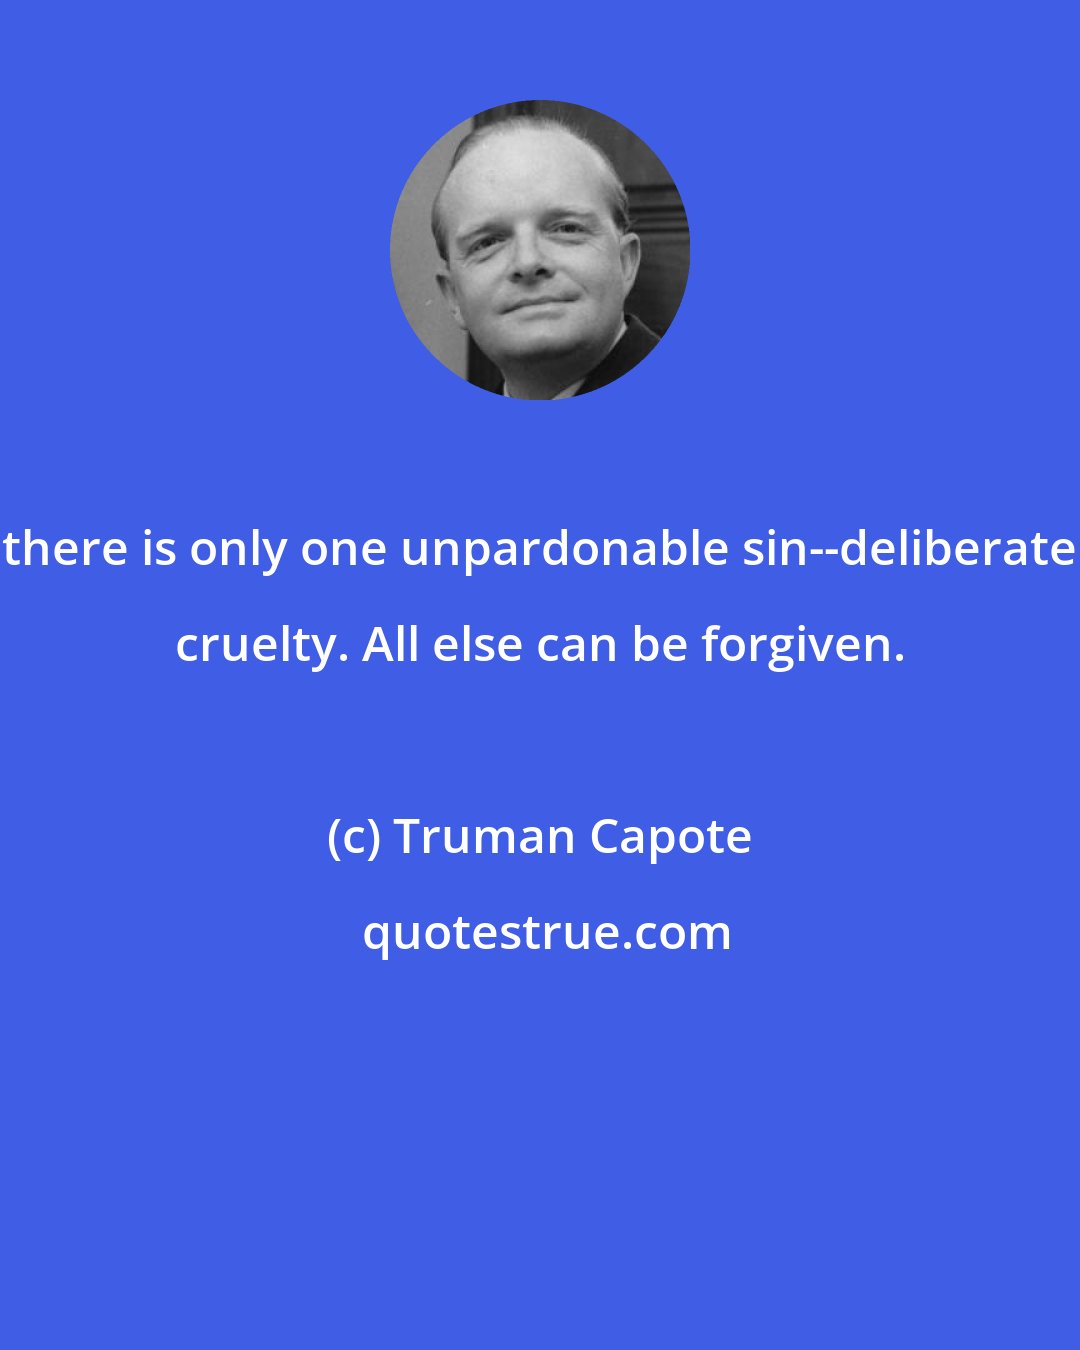 Truman Capote: there is only one unpardonable sin--deliberate cruelty. All else can be forgiven.